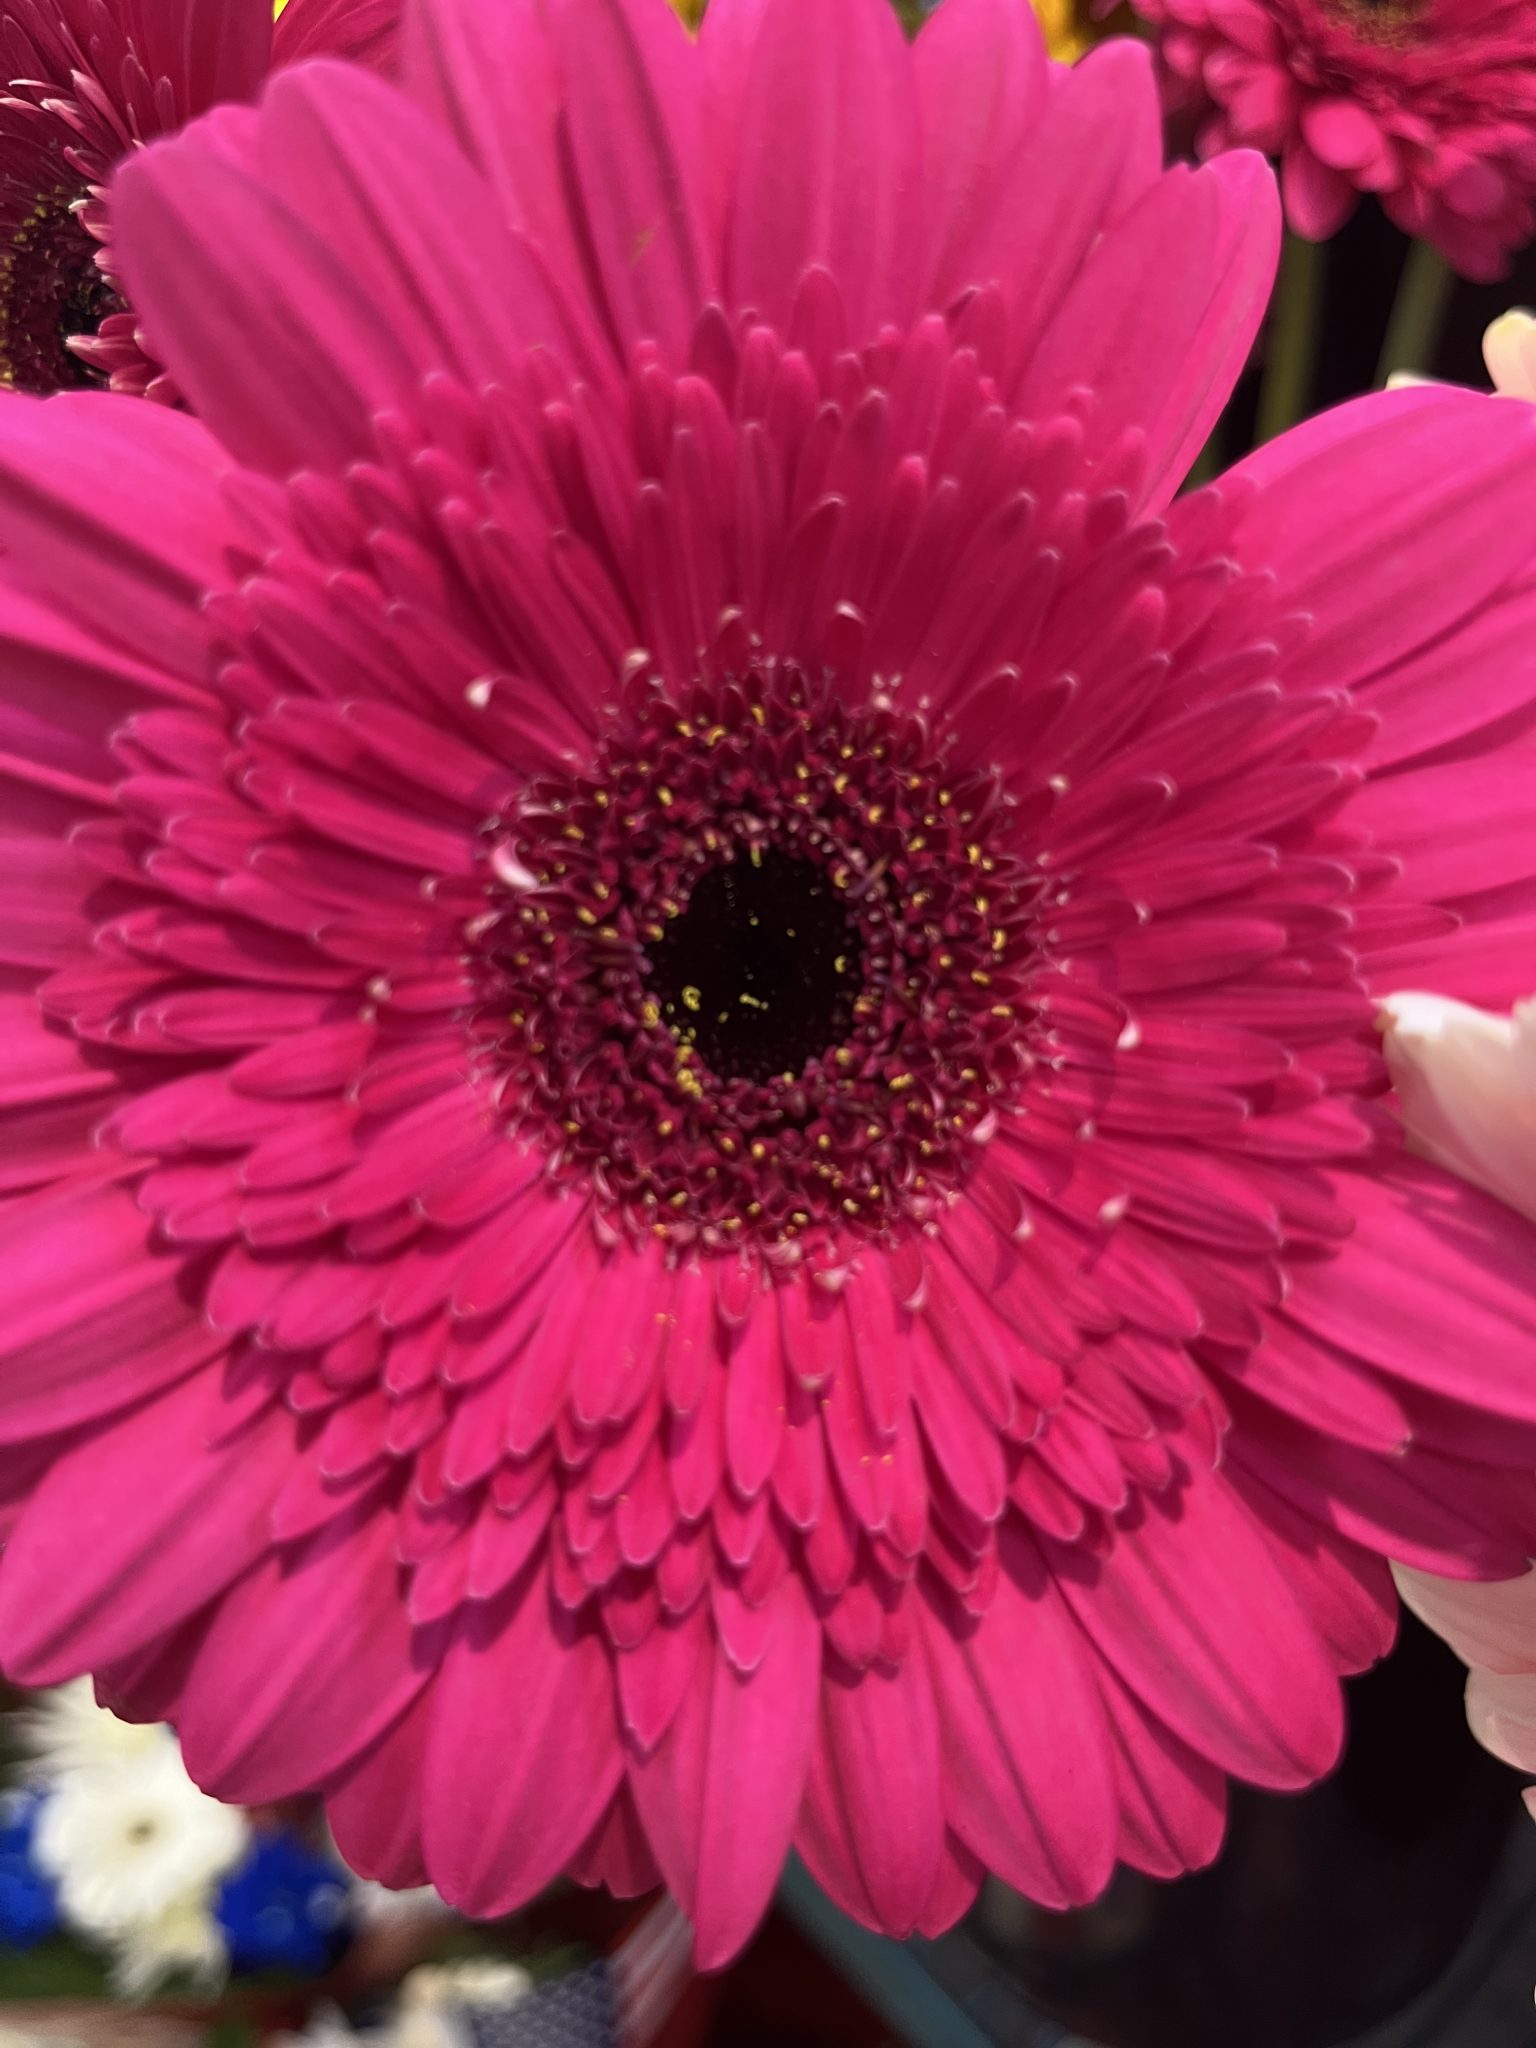 Closeup picture of the center of a gerbera daisy.